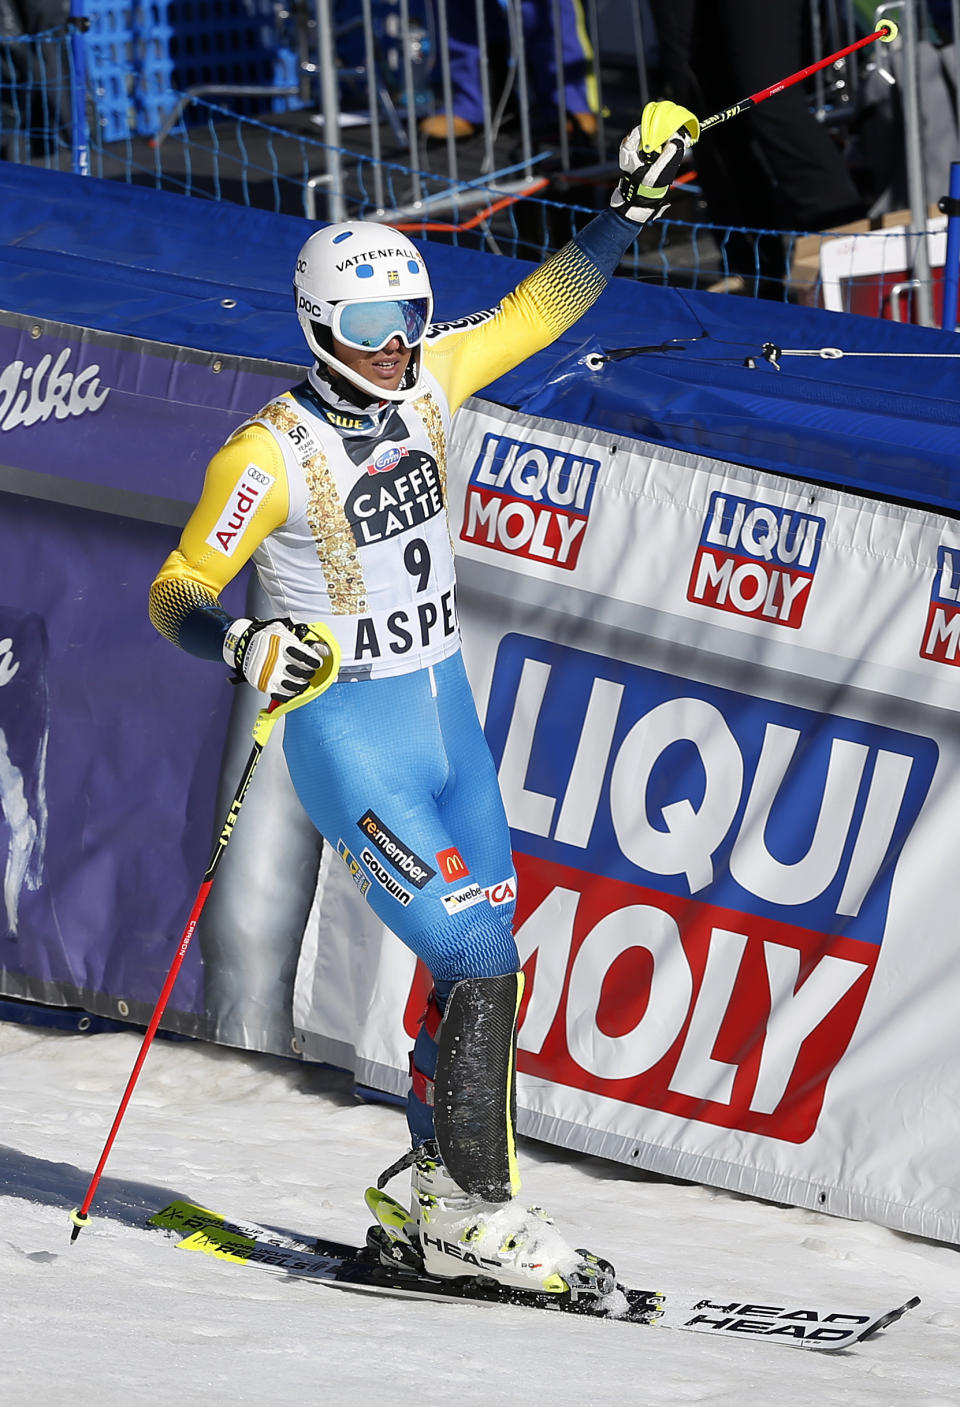 Sweden's Andre Myhrer reacts after the first run of a men's World Cup slalom ski race Sunday, March 19, 2017, in Aspen, Colo. (AP Photo/Brennan Linsley)